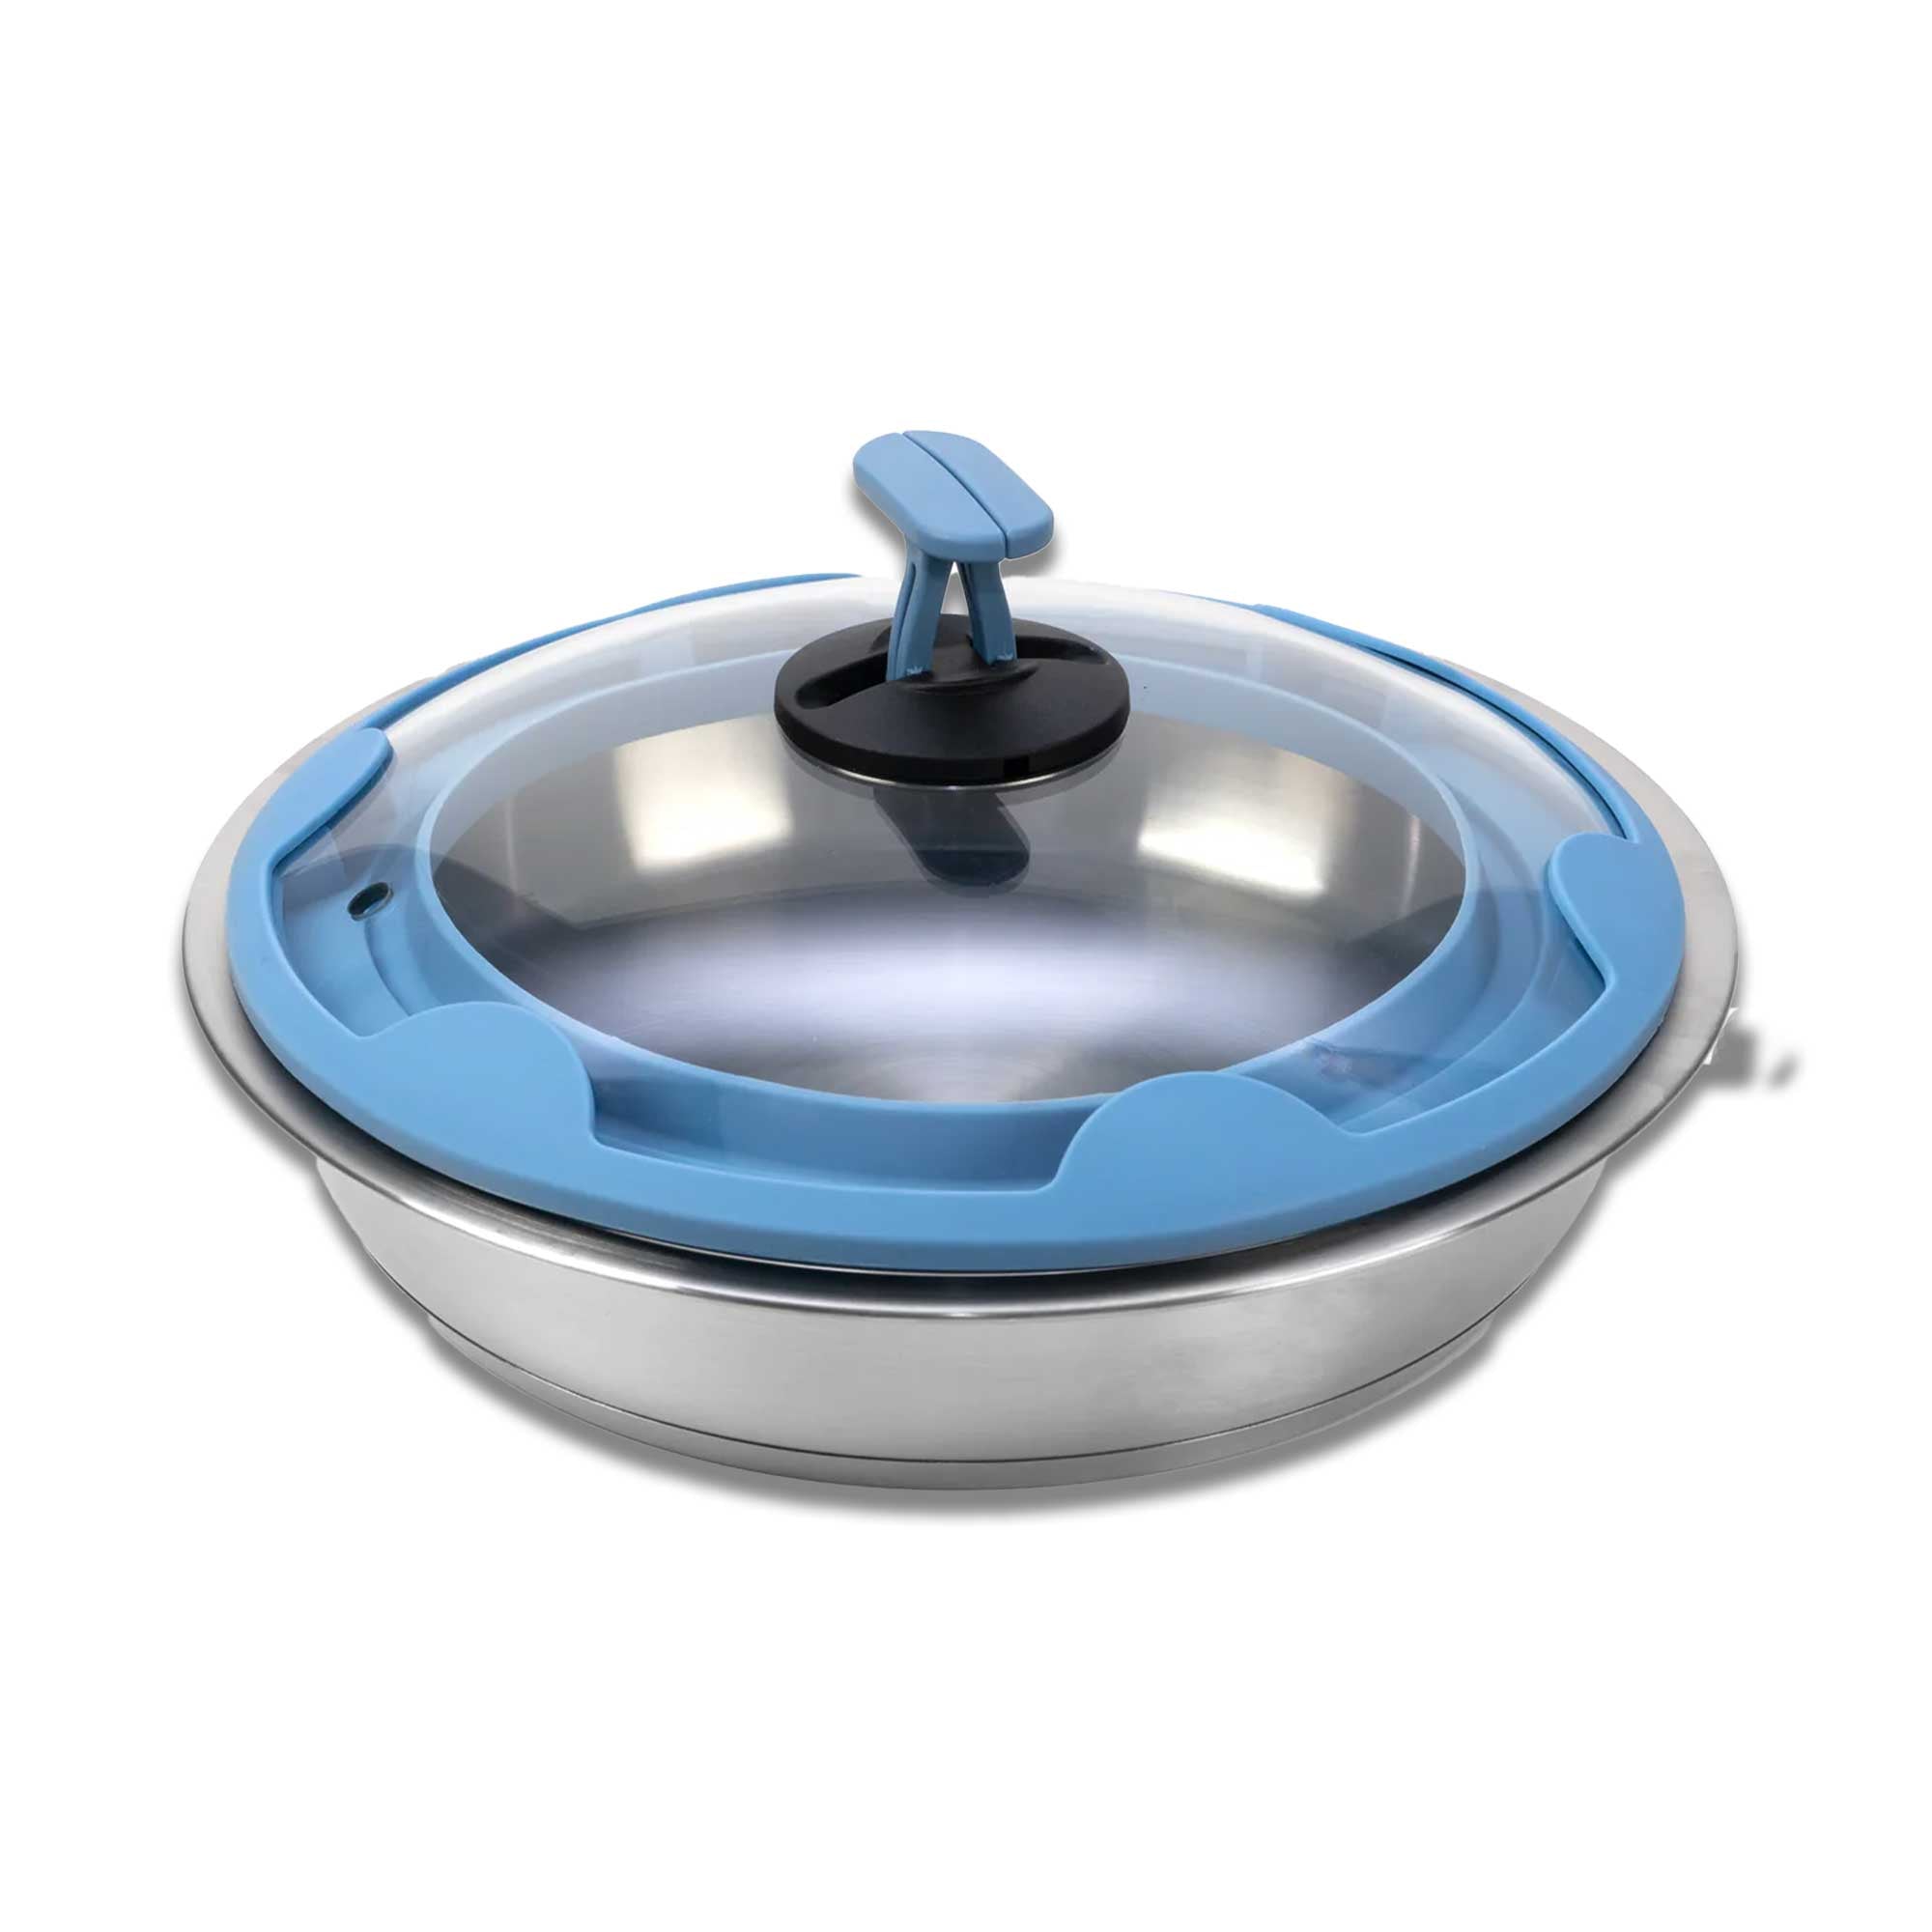 CookVision pan lid